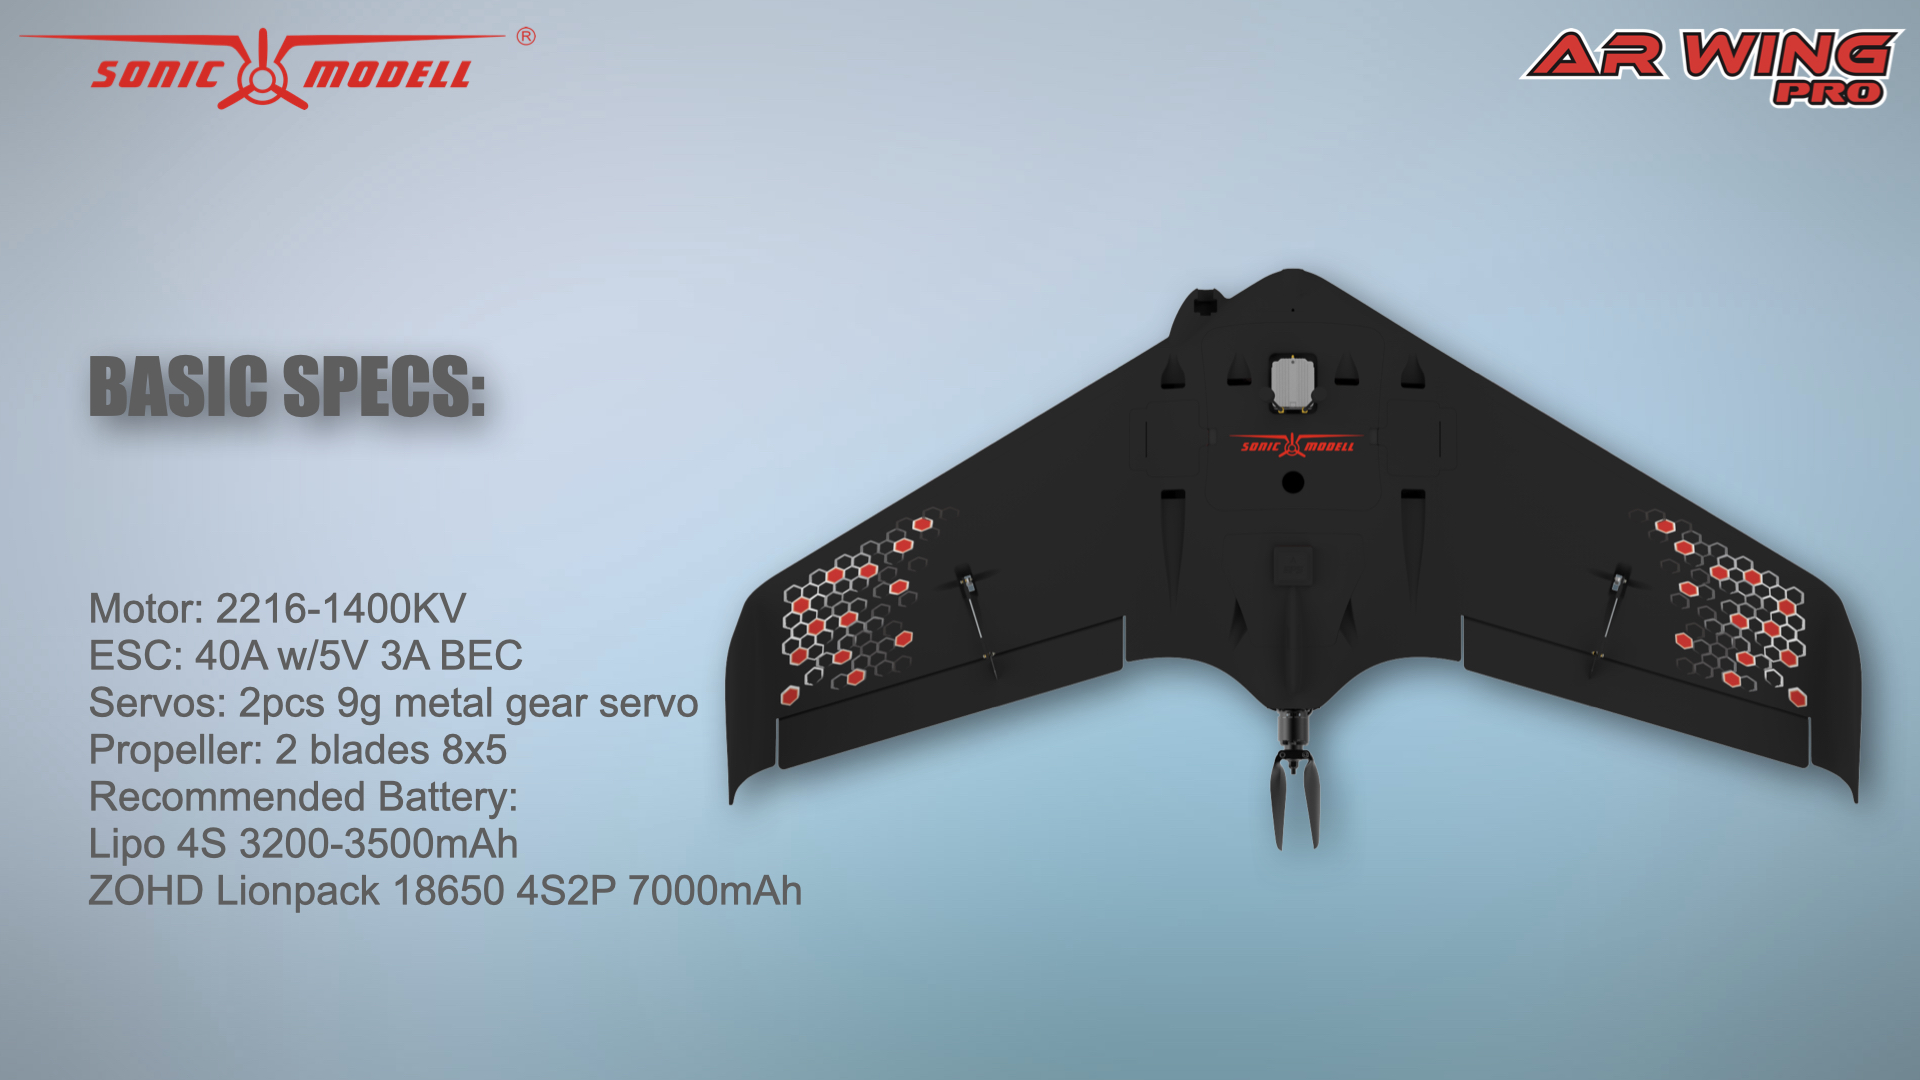 Sonicmodell-AR-Wing-Pro-1000mm-Wingspan-EPP-FPV-Flying-Wing-RC-Airplane-KITPNP-1756841-3